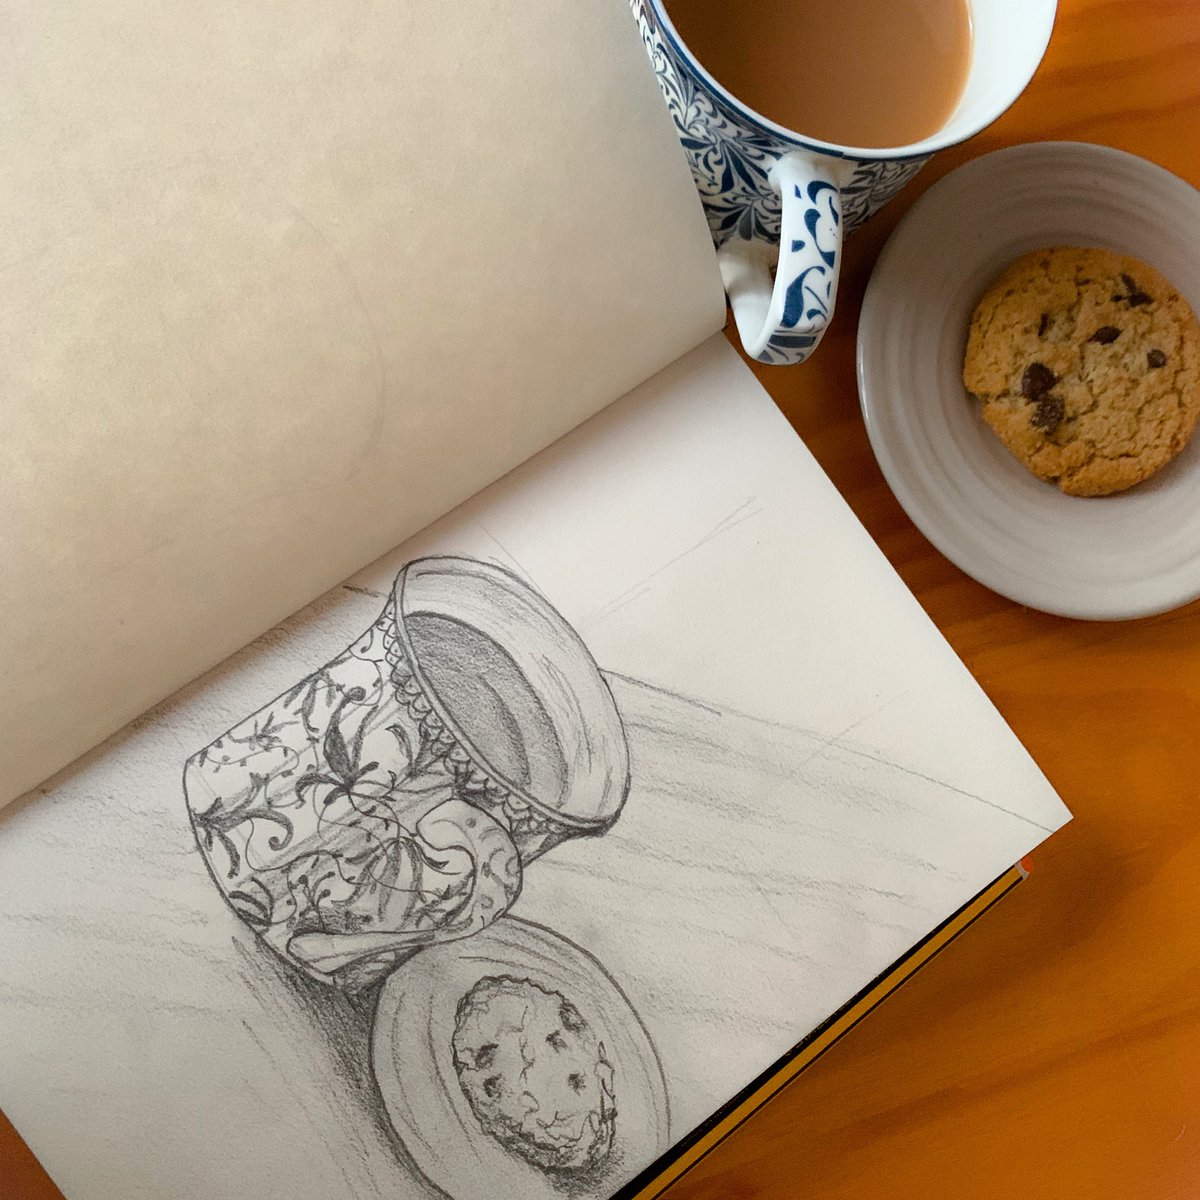 Each week we will bring you a little sketch of things you can find around the house! Drawing can be very therapeutic and we would love you to join in! Send us yours at jharlin@badmintonschool.co.uk. Happy sketching! #BSBArt #sketch #drawing #artastherapy